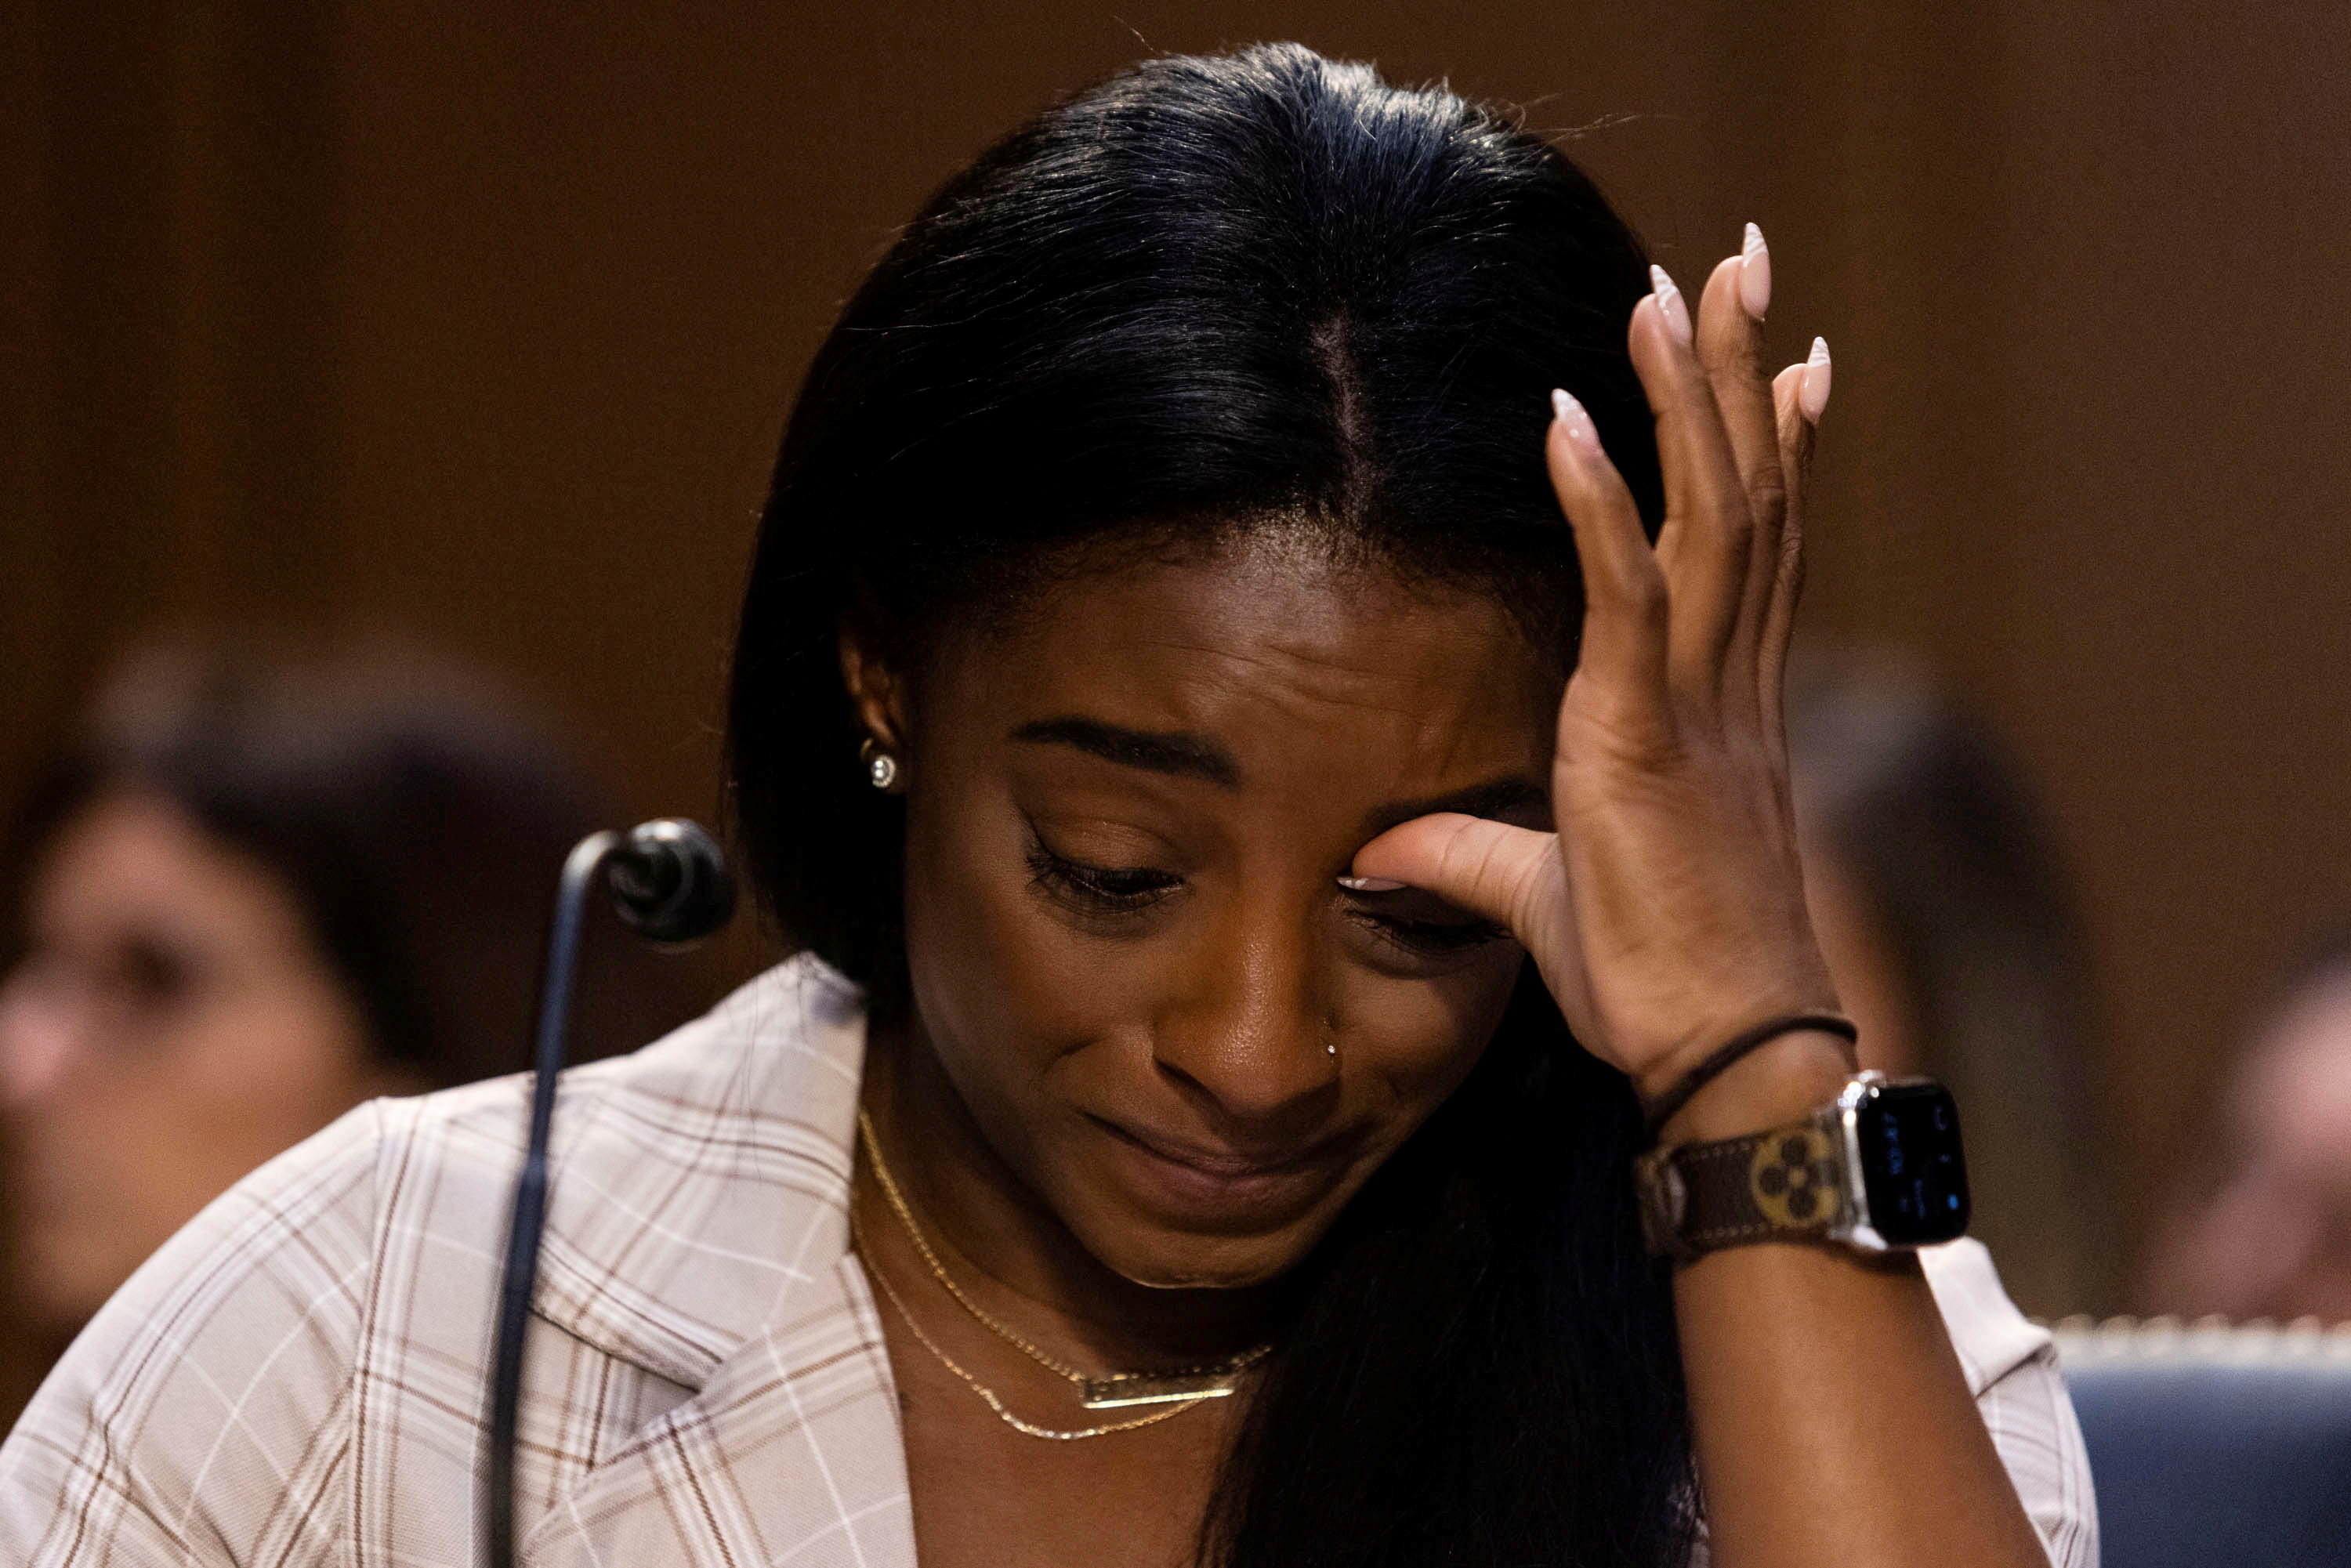 U.S. Olympic gymnast Simone Biles testifies during a Senate Judiciary hearing about the Inspector General's report on the FBI handling of the Larry Nassar investigation of sexual abuse of Olympic gymnasts, on Capitol Hill, in Washington, D.C., U.S., September 15, 2021. Graeme Jennings/Pool via REUTERS TPX IMAGES OF THE DAY